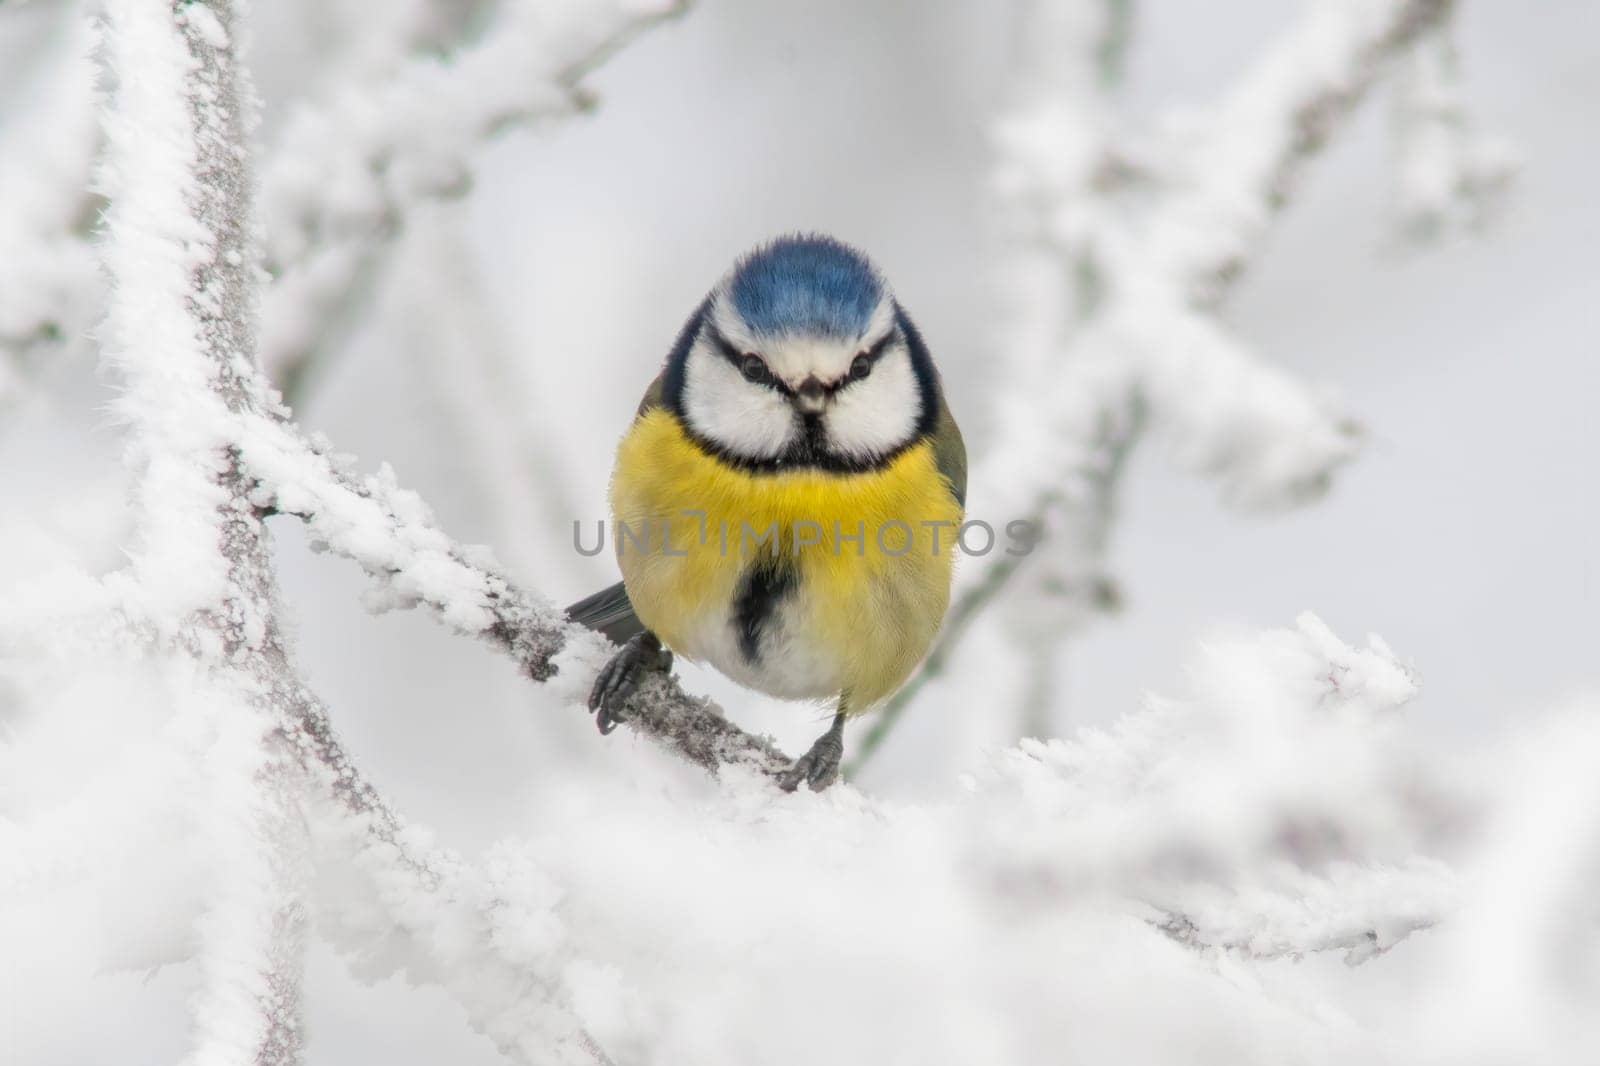 blue tit sits on snowy branches in cold winter time by mario_plechaty_photography